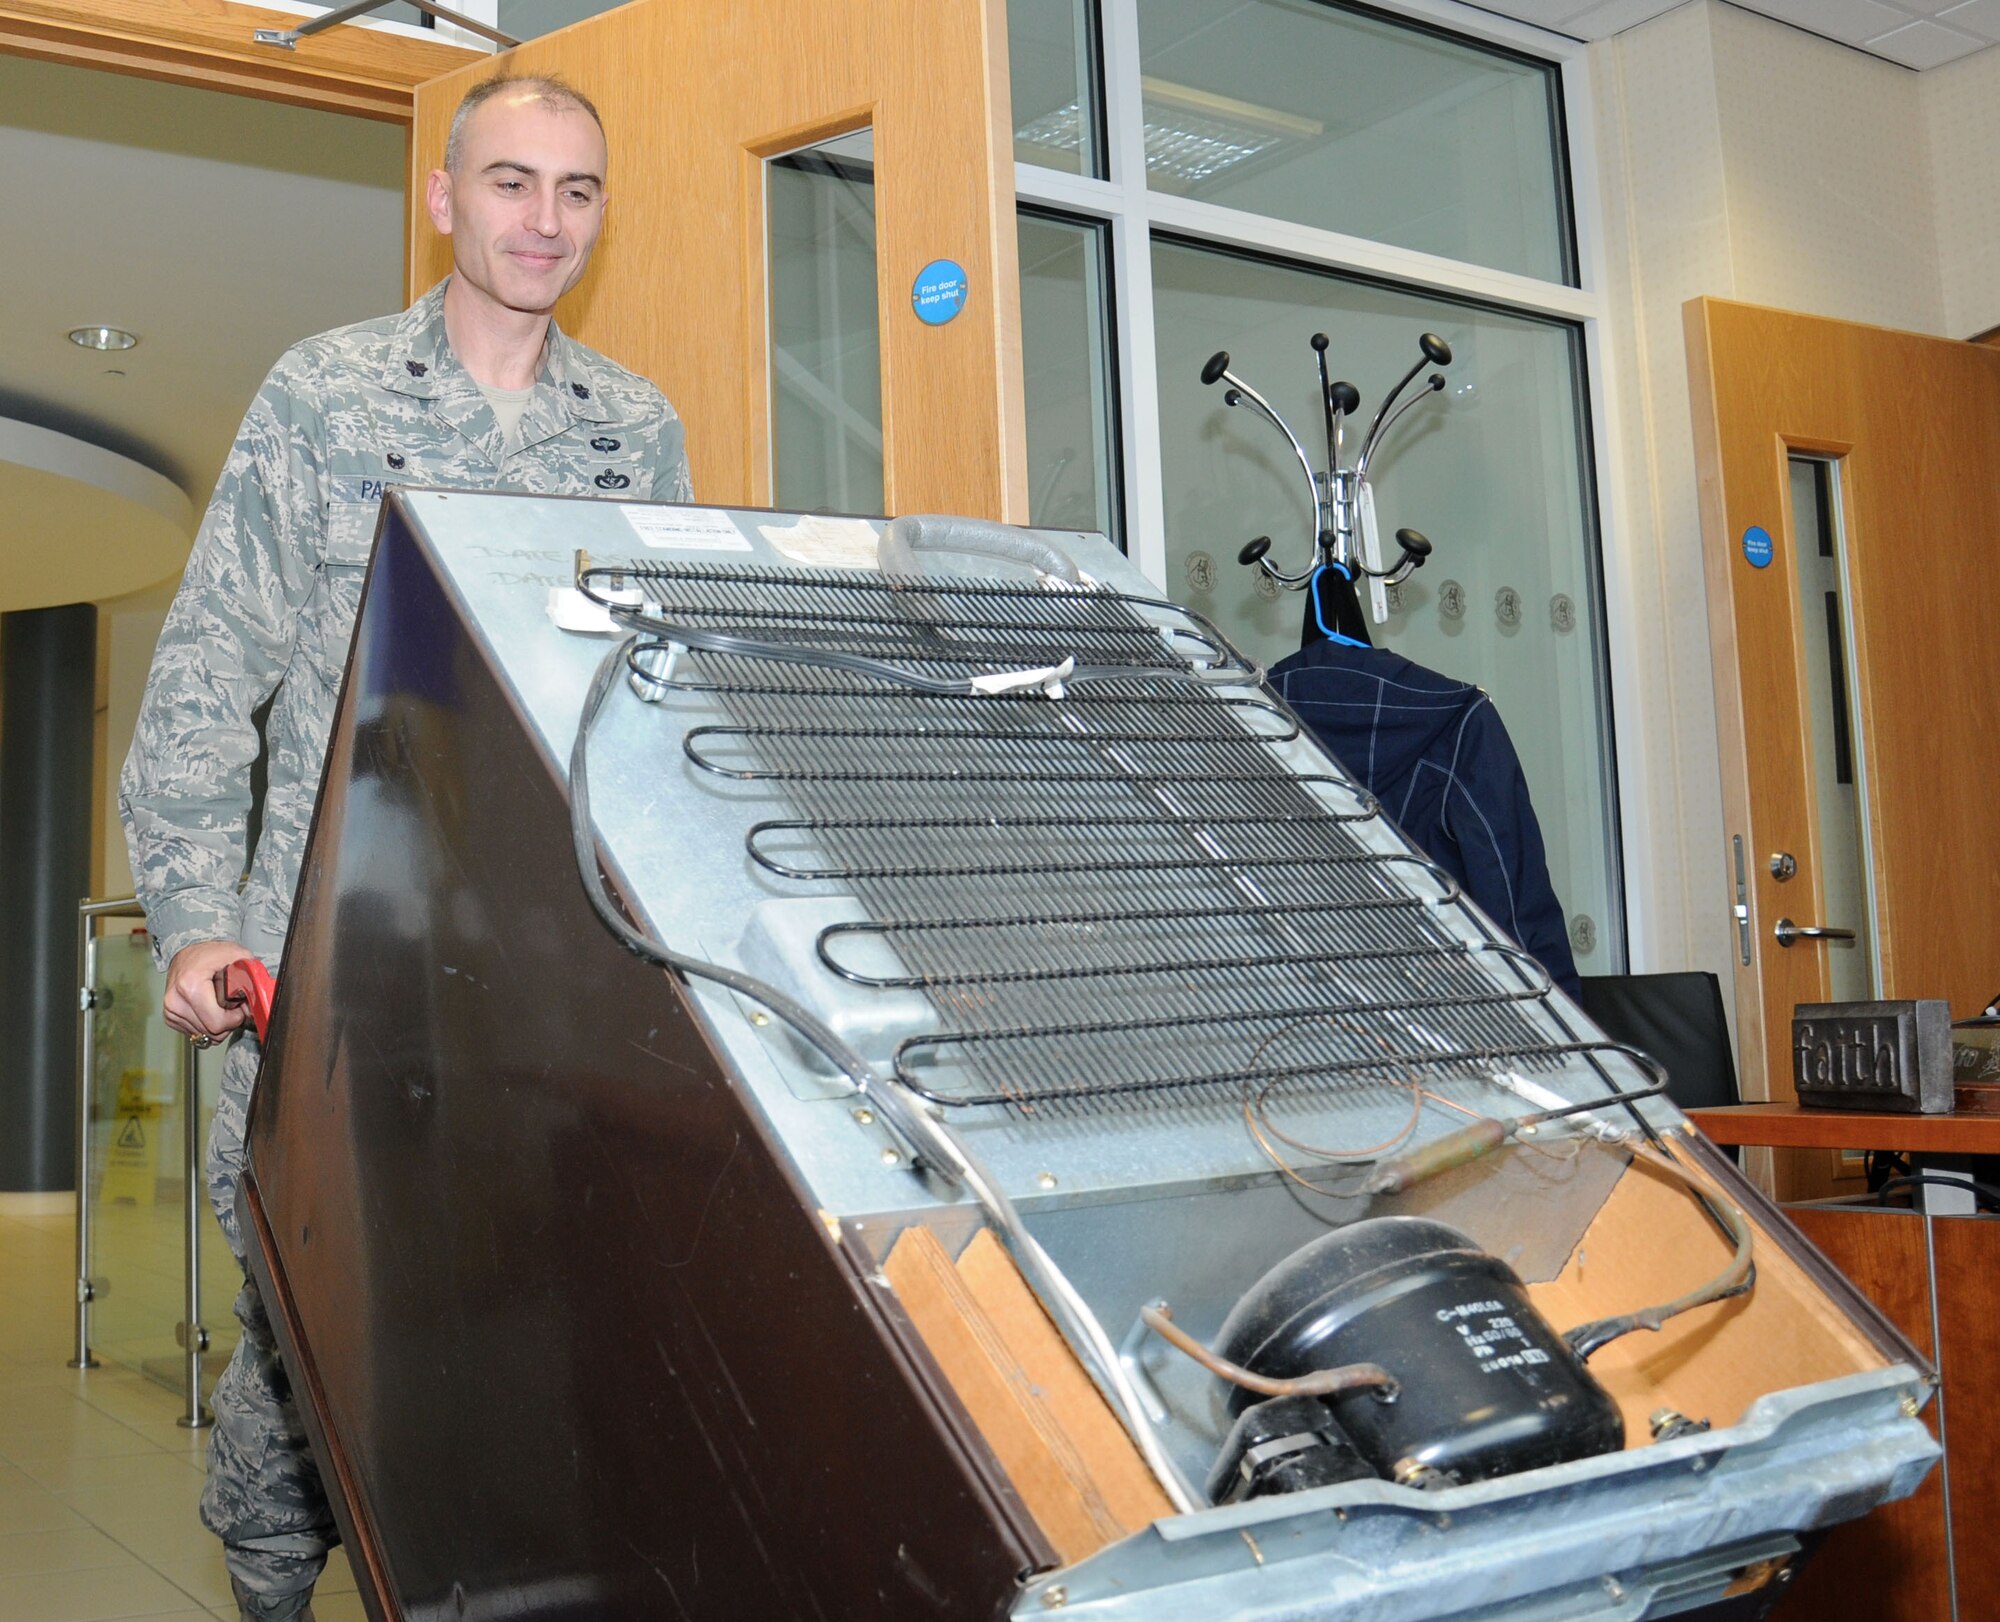 U.S. Air Force Lt. Col. Kevin Parker, 100th Civil Engineer Squadron commander, uses a hand cart to remove a personal refrigerator from his office Oct. 24, 2014, on RAF Mildenhall, England. Parker saw an opportunity to save energy by removing his refrigerator from his office and using the communal one in the kitchen area. (U.S. Air Force photo by Gina Randall/Released)